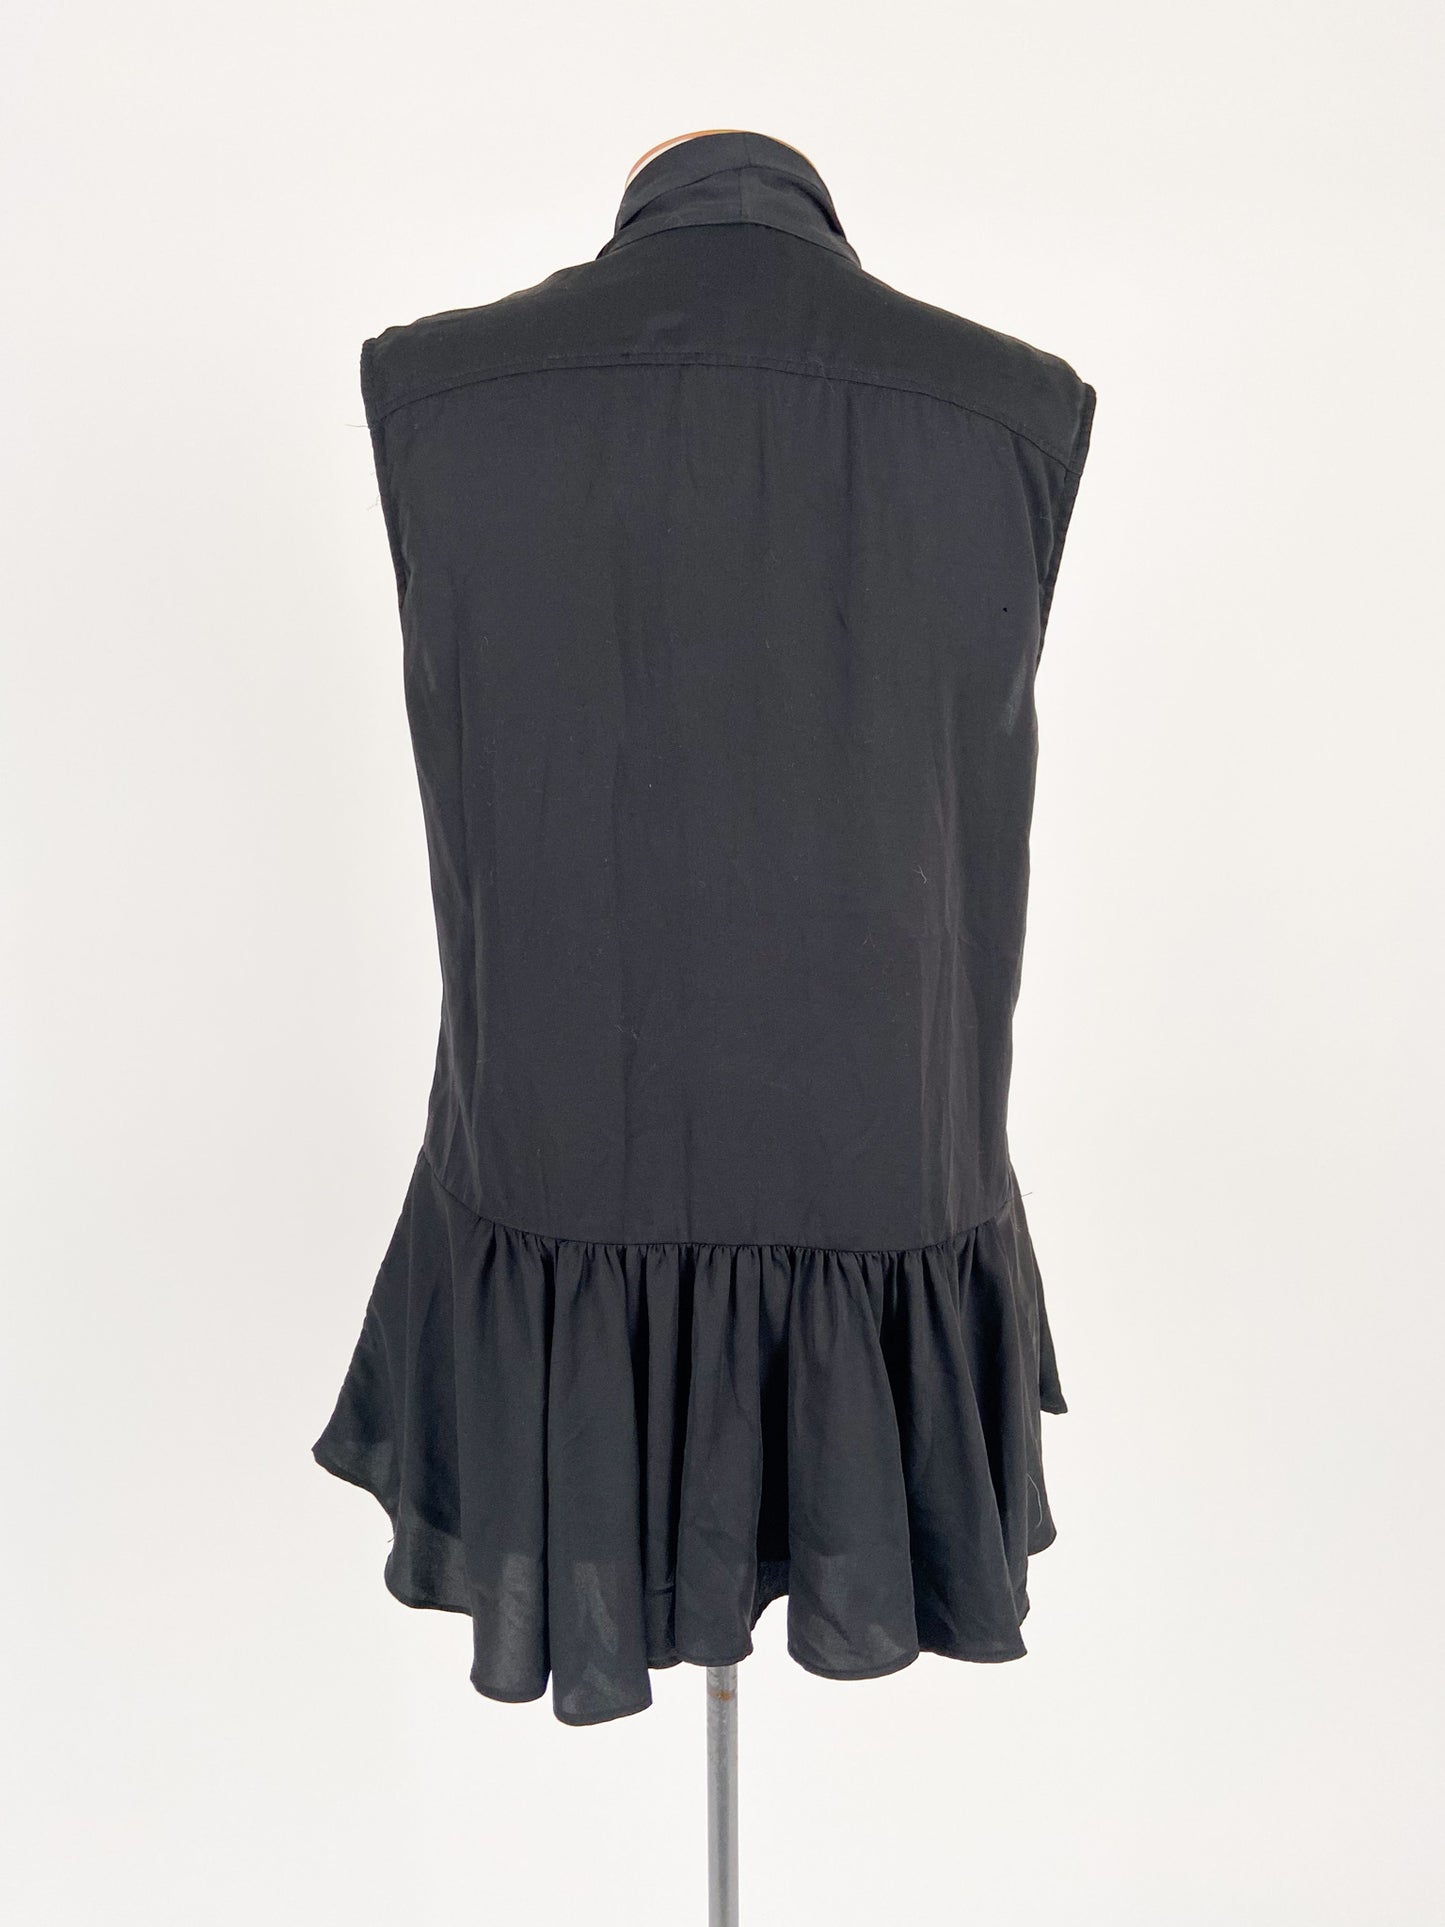 Witchery | Black Casual Top | Size 12